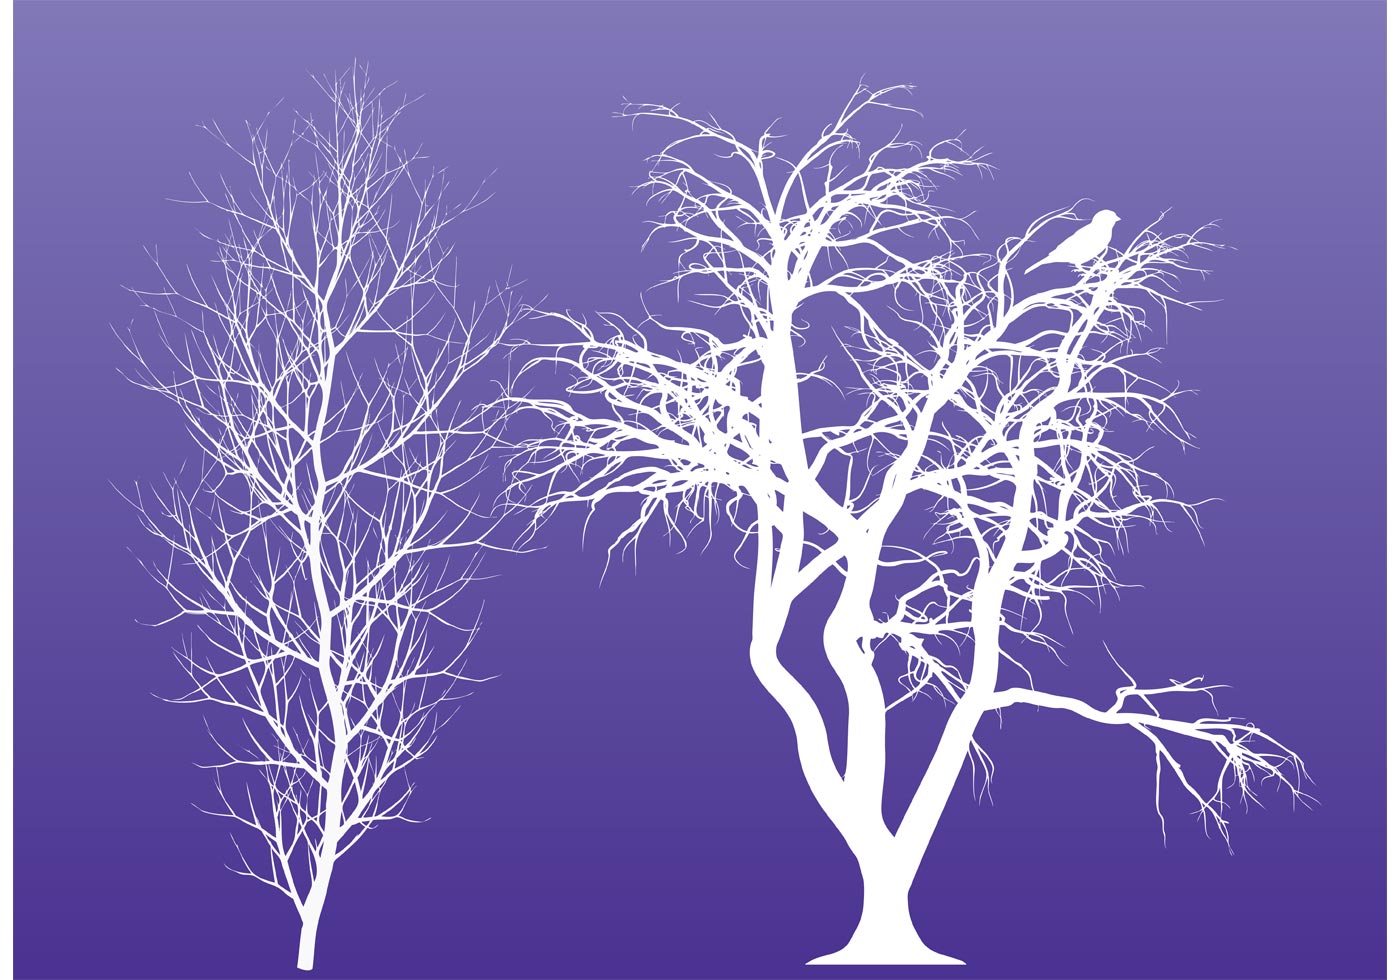 Download Winter Trees - Download Free Vector Art, Stock Graphics & Images